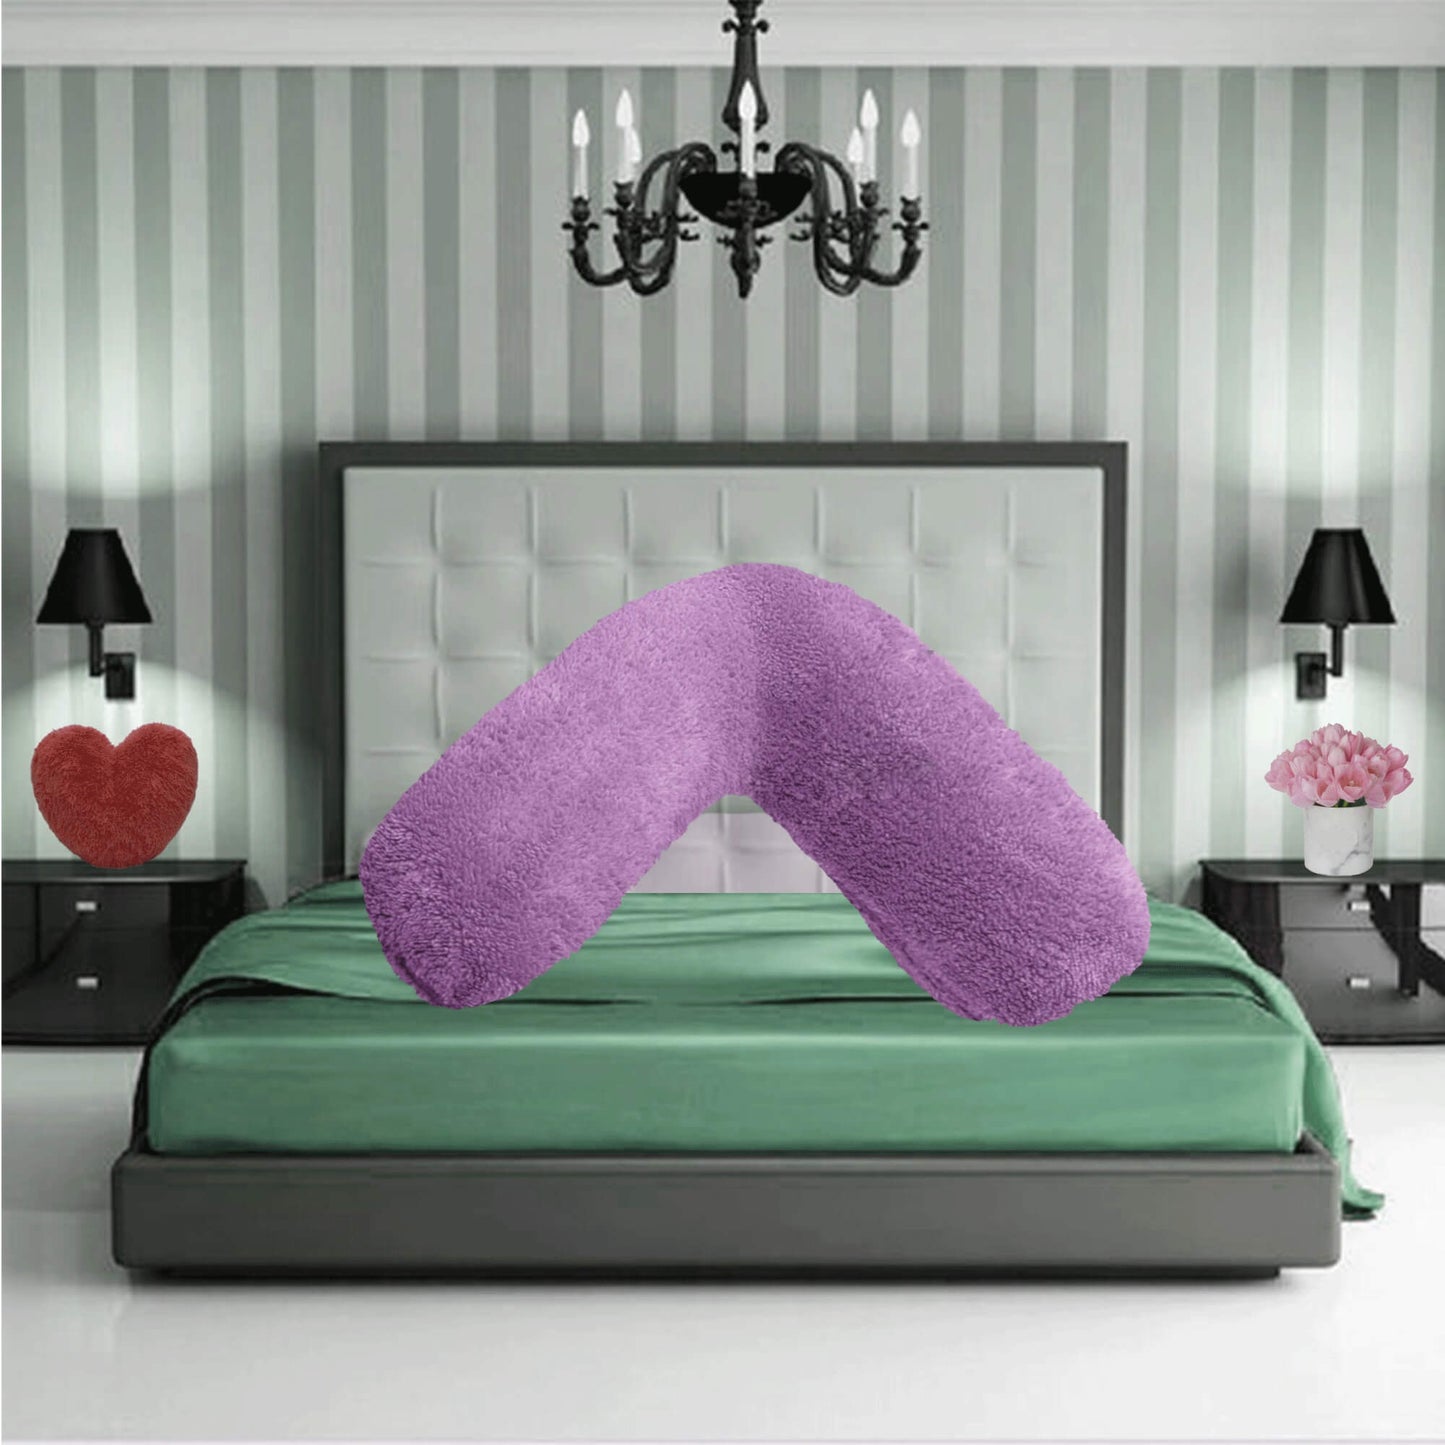 V Shaped Teddy Pillowcase Pregnancy Maternity Cover Only - TheComfortshop.co.ukPillow Case10721718956508thecomfortshopTheComfortshop.co.ukTeddy V Cover Lilac OnlyLilacV Shaped Teddy Pillowcase Pregnancy Maternity Cover Only - TheComfortshop.co.uk